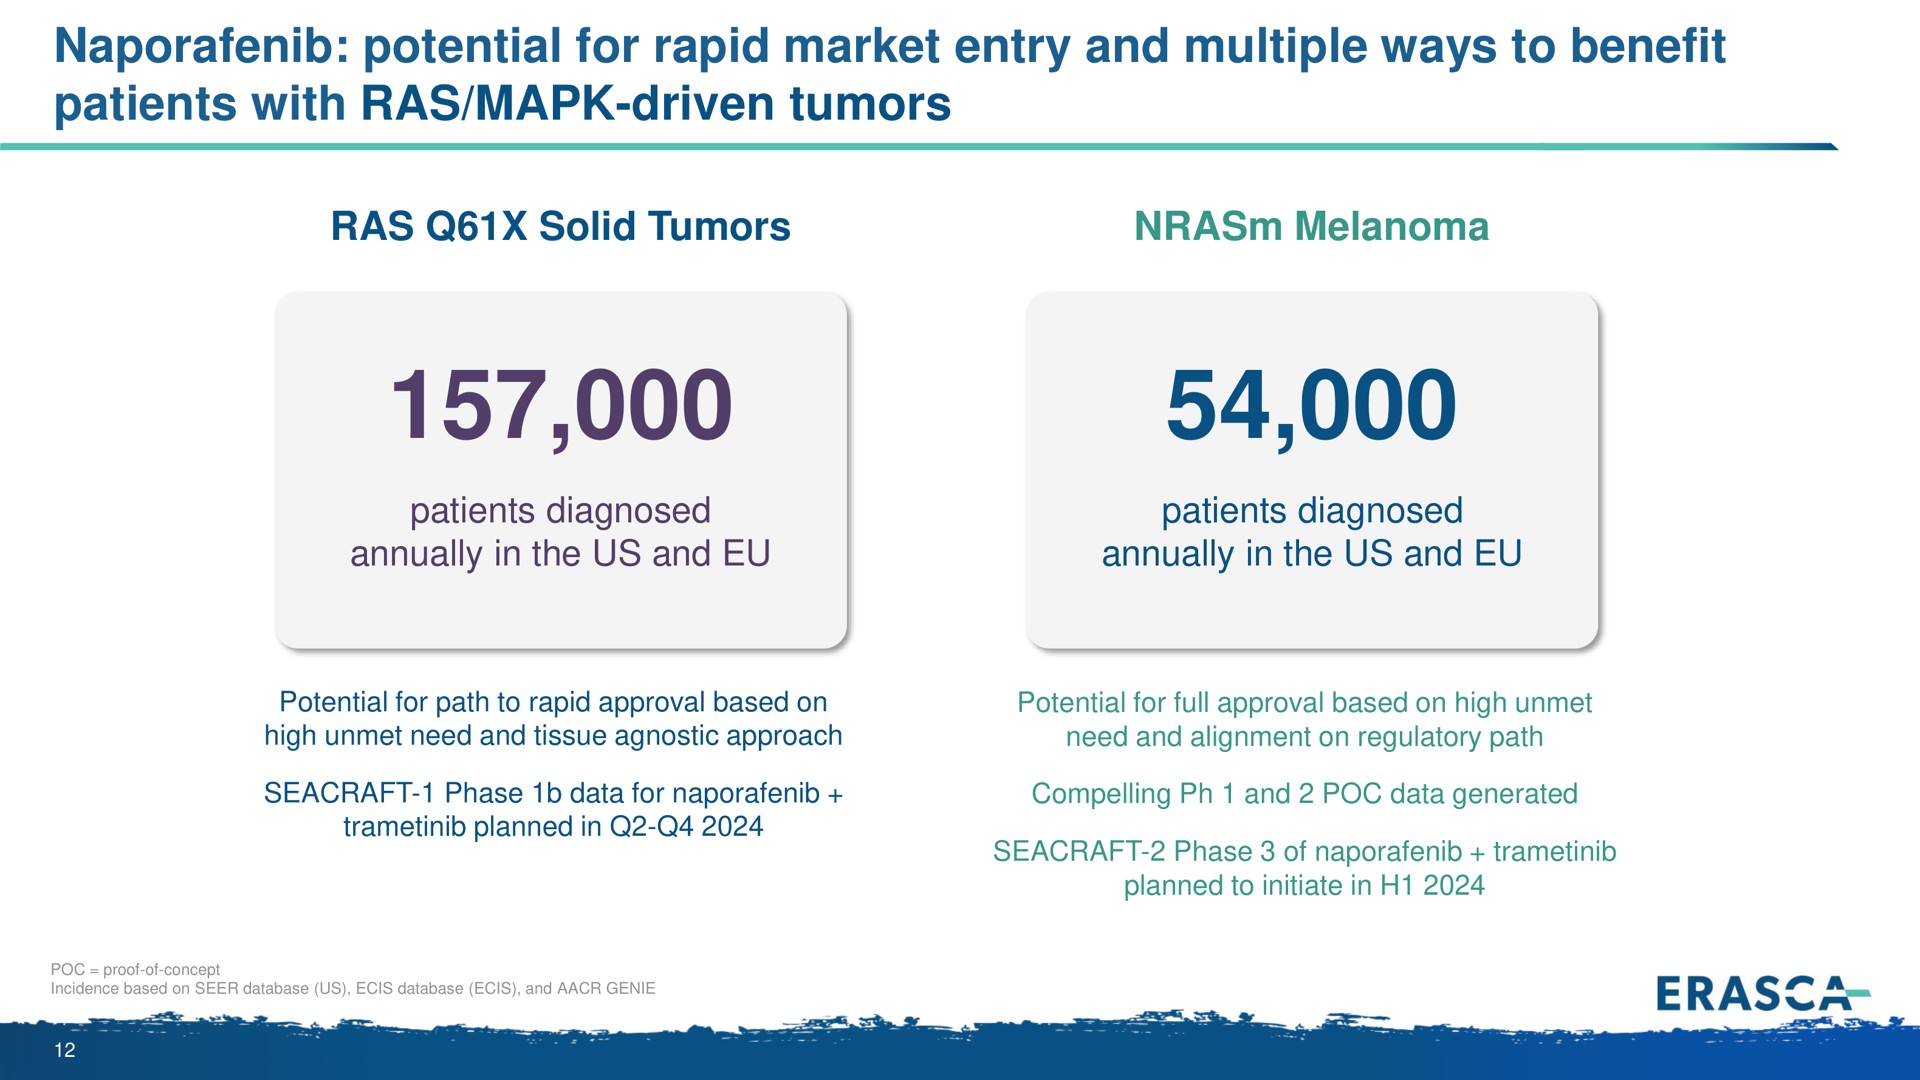 potential for rapid market entry and multiple ways to benefit patients with ras driven tumors | Erasca